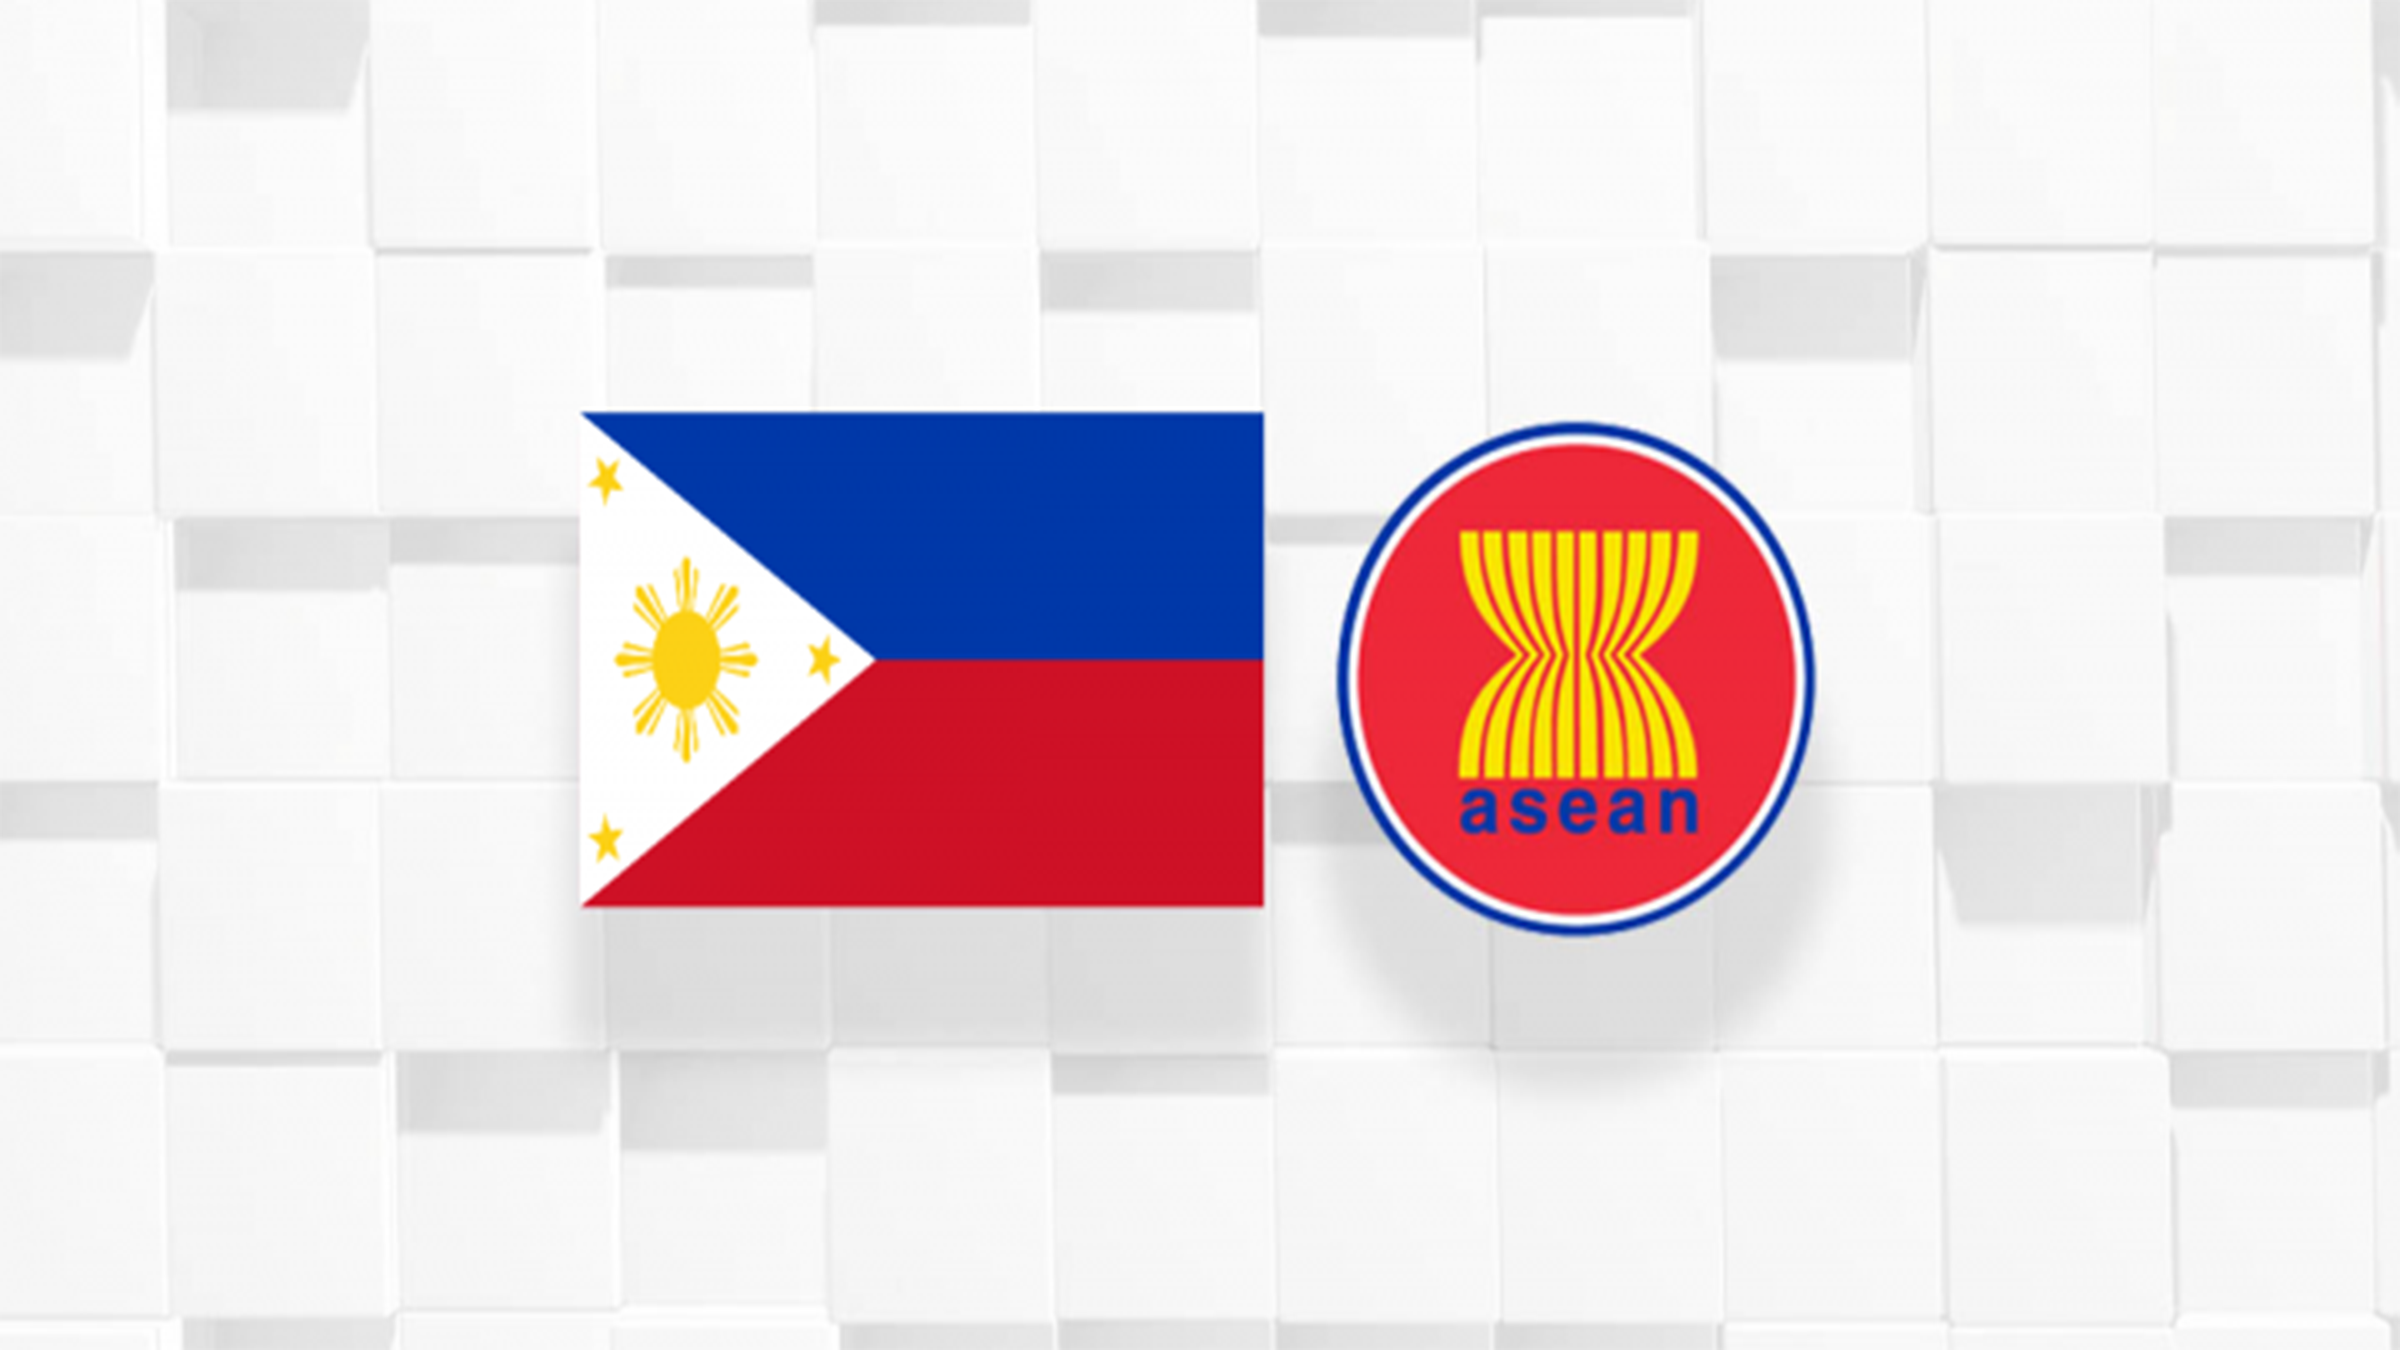 Philippines must take the lead in Asean